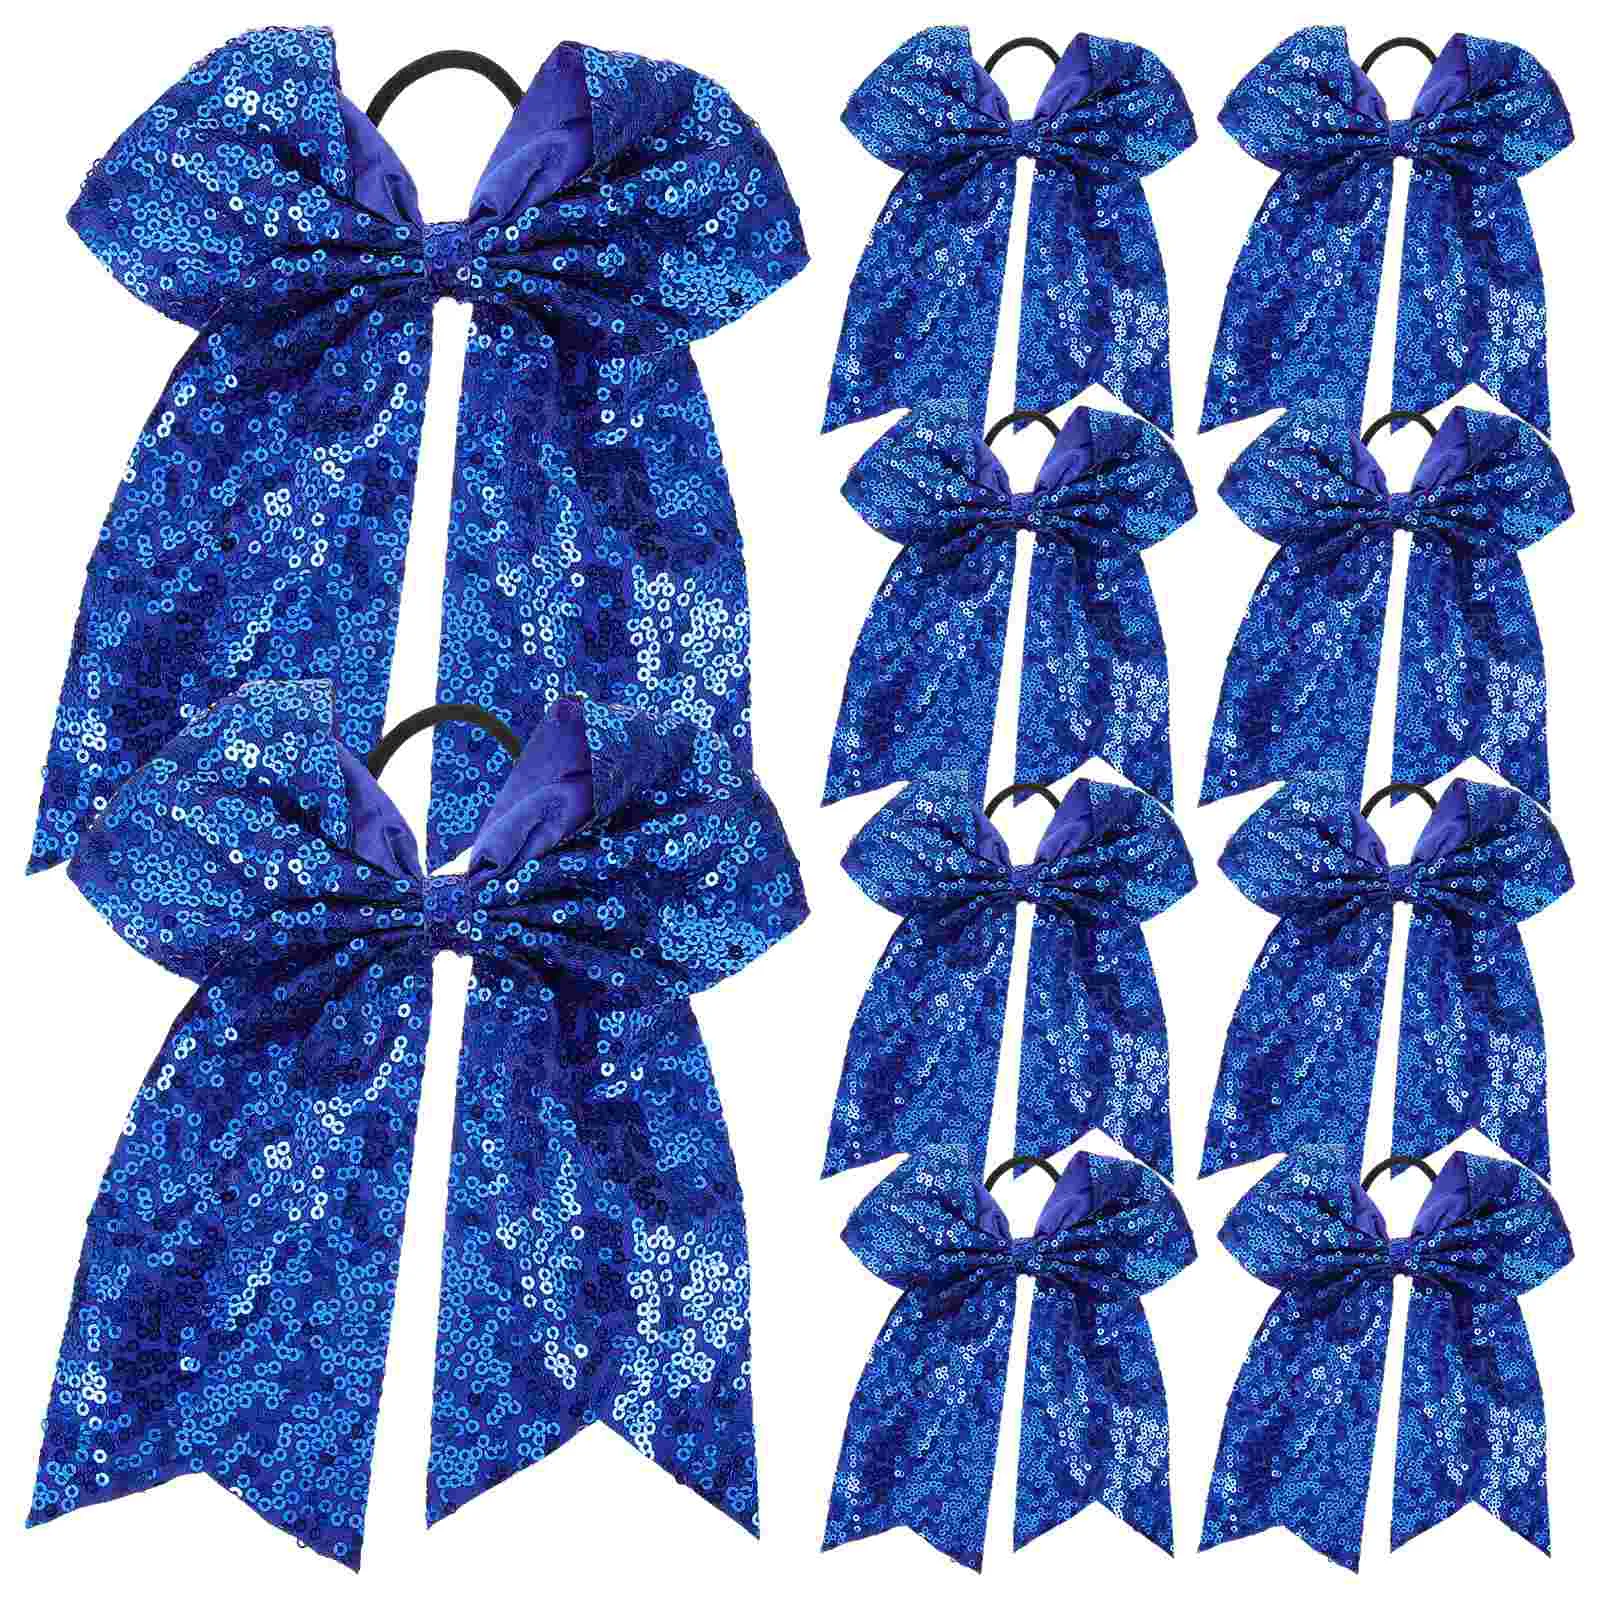 

10pcs Delicate Cheer Bows Practical Bows for Girls Cheer Bow Cheer Hair Bows